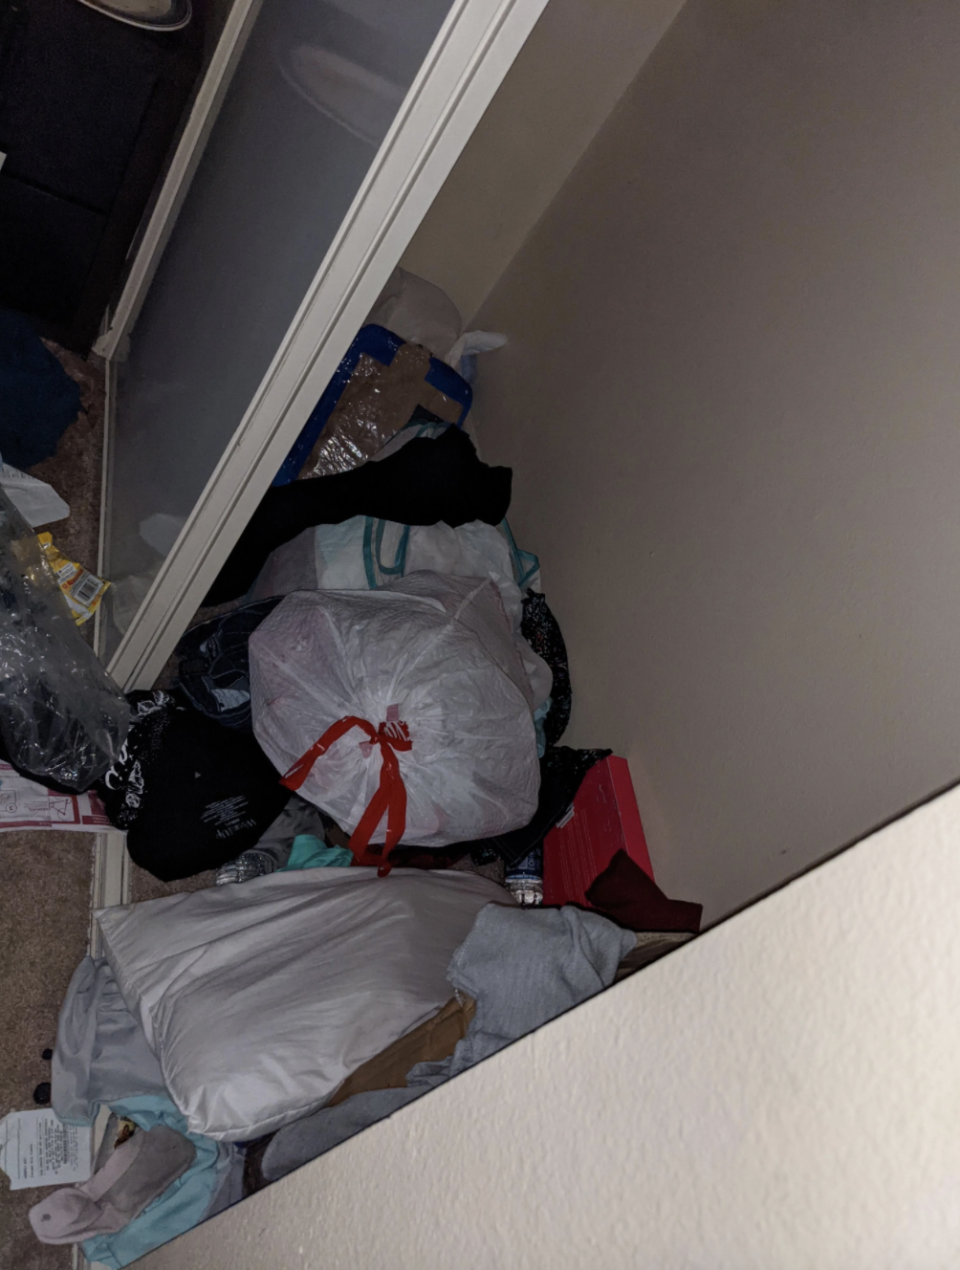 Bad roomie's room, dirty with used water bottles, soda bottles, and trash bags